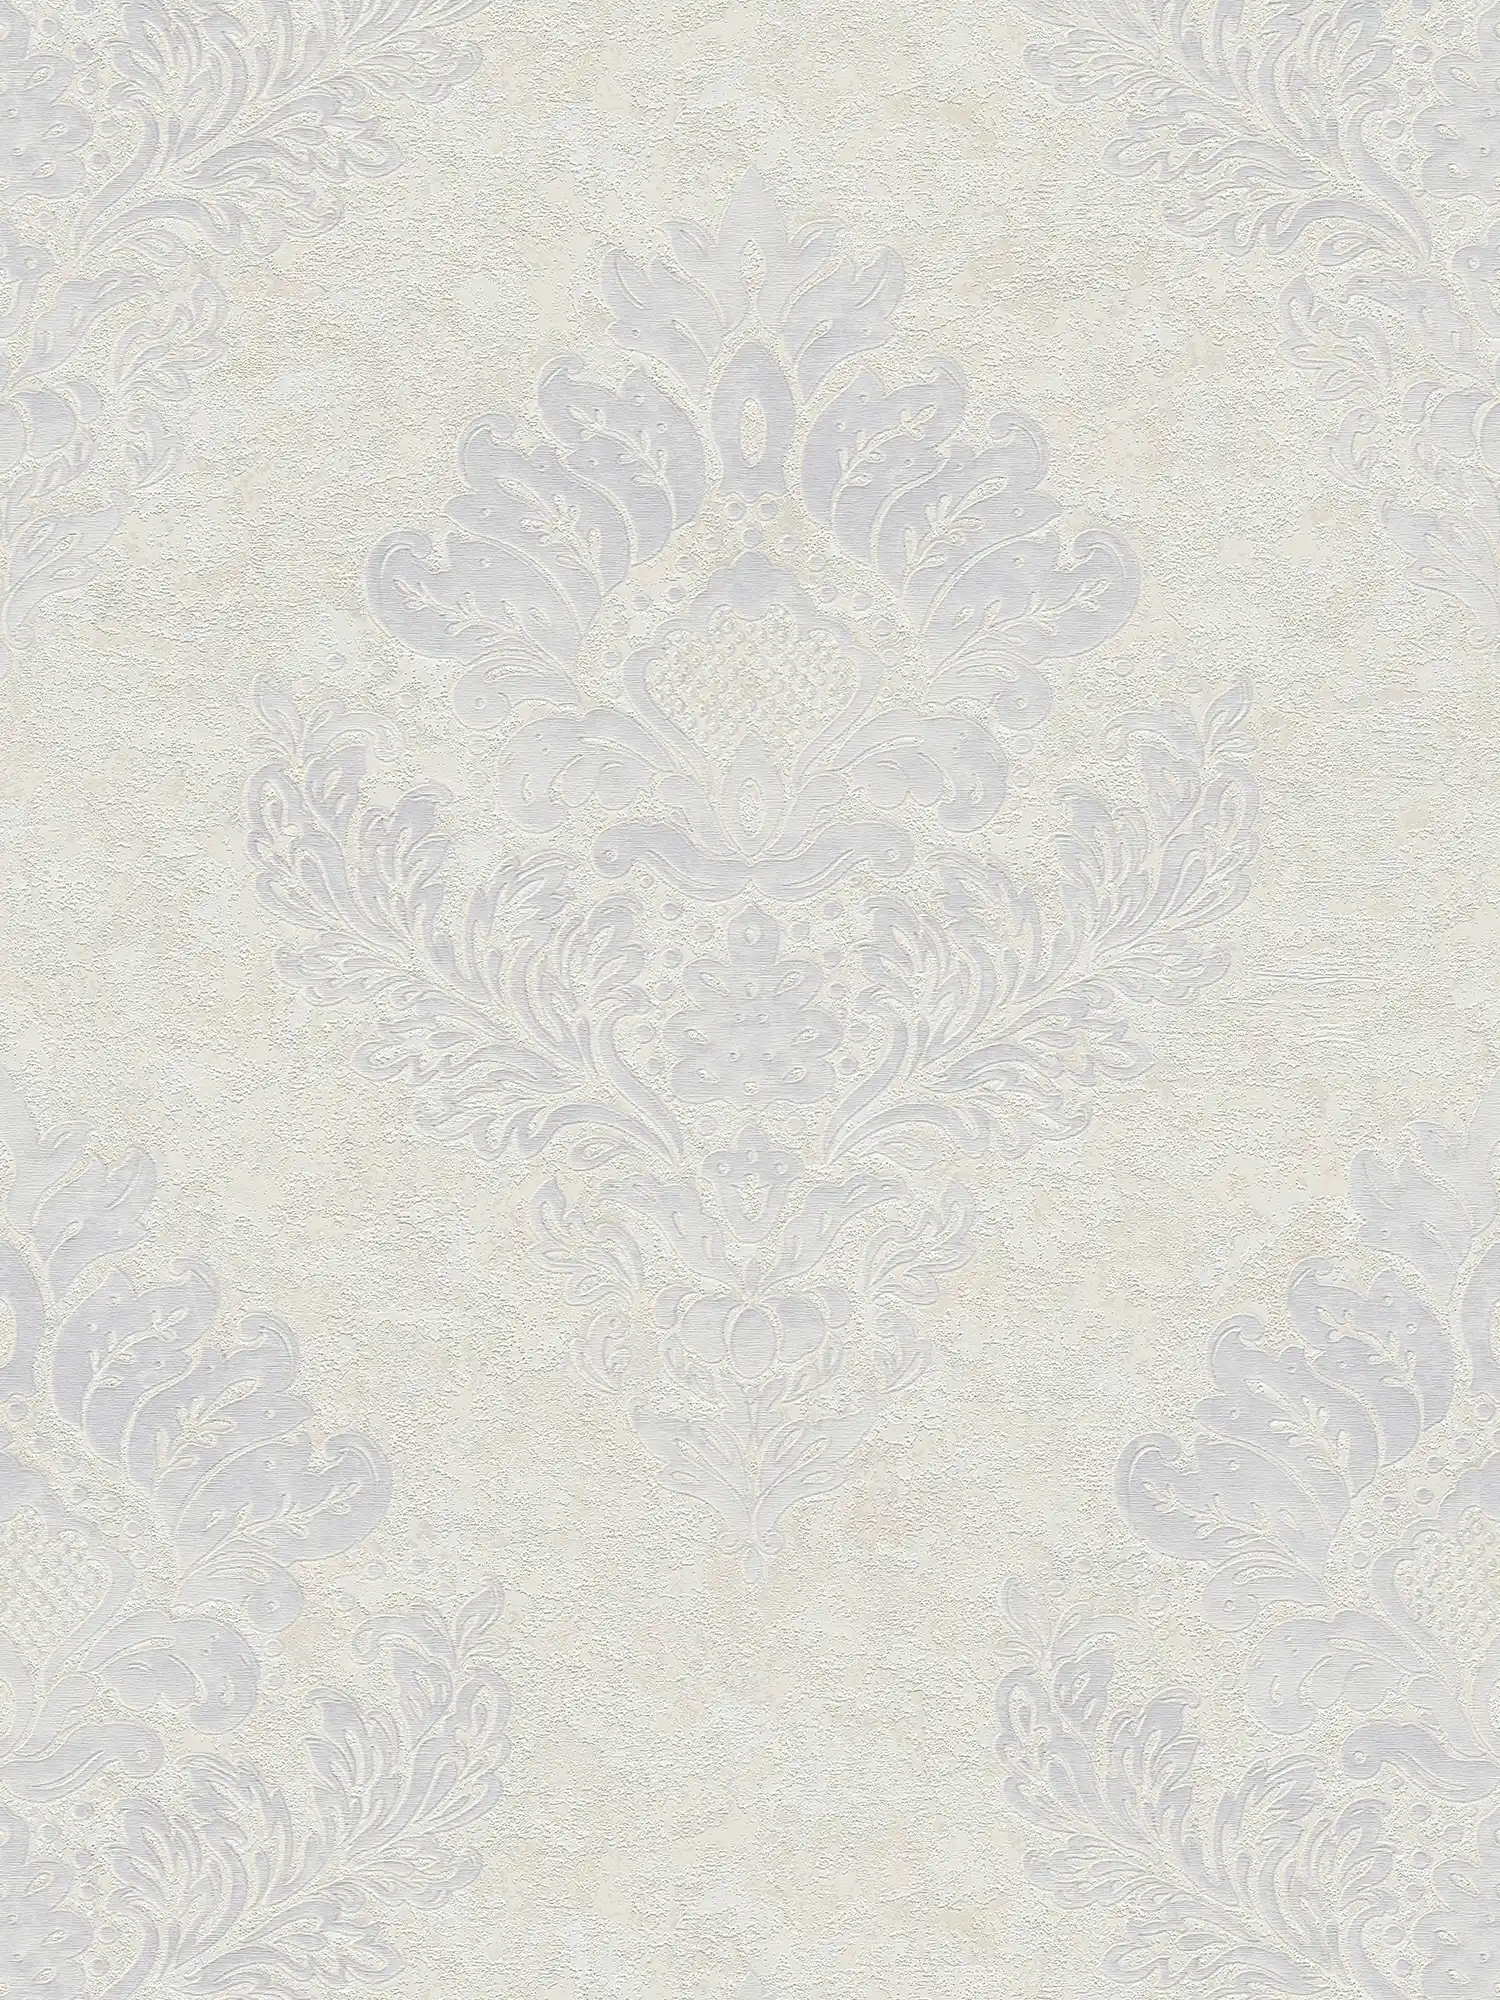 Non-woven wallpaper with floral ornaments & metallic luster - beige, grey, white
